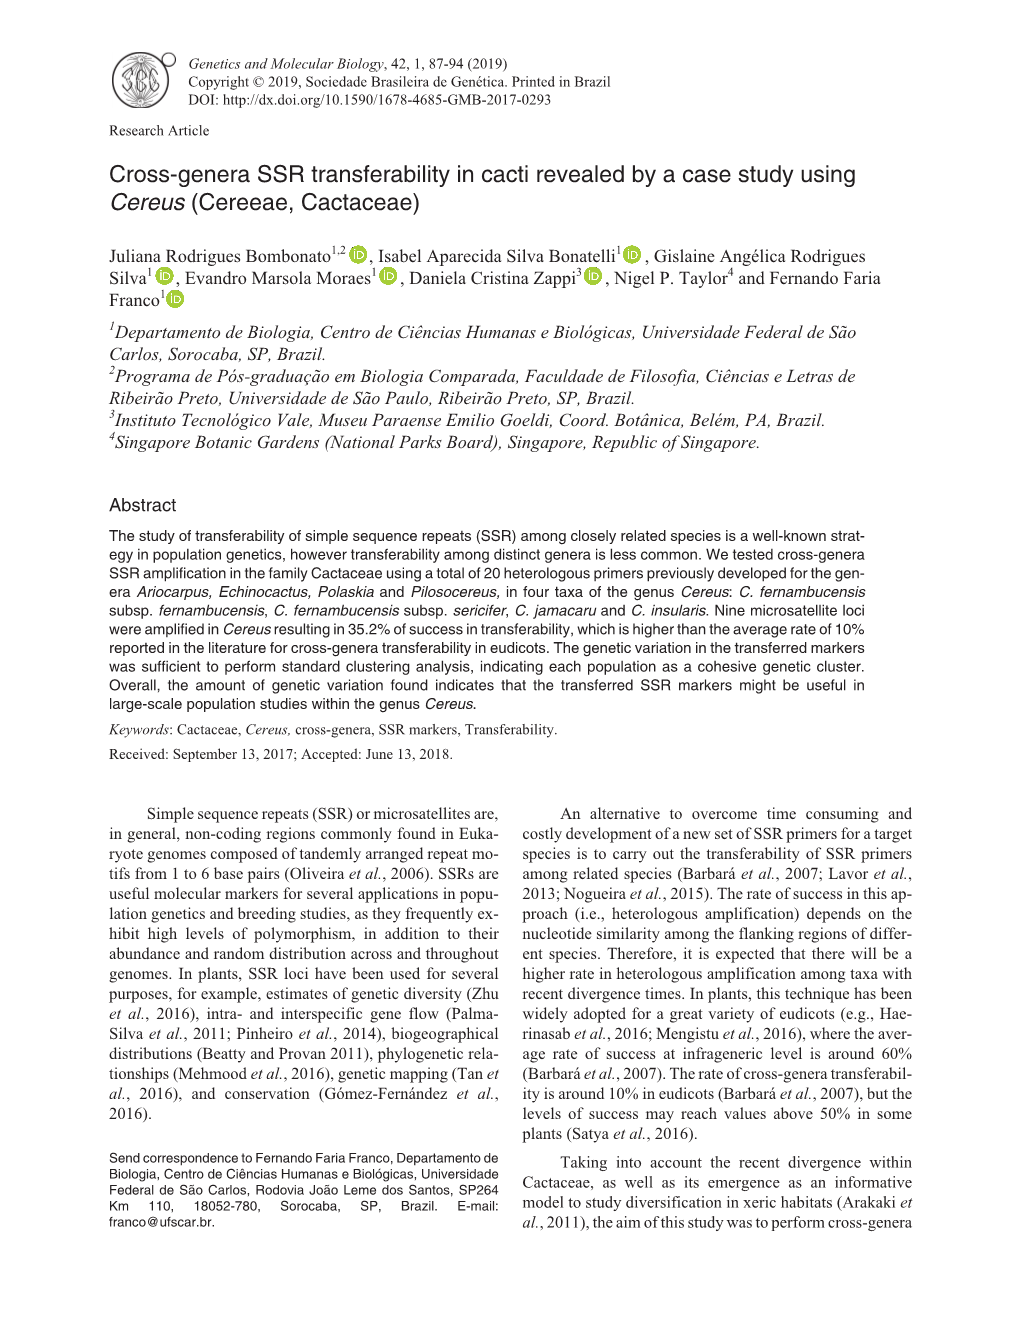 Cross-Genera SSR Transferability in Cacti Revealed by a Case Study Using Cereus (Cereeae, Cactaceae)